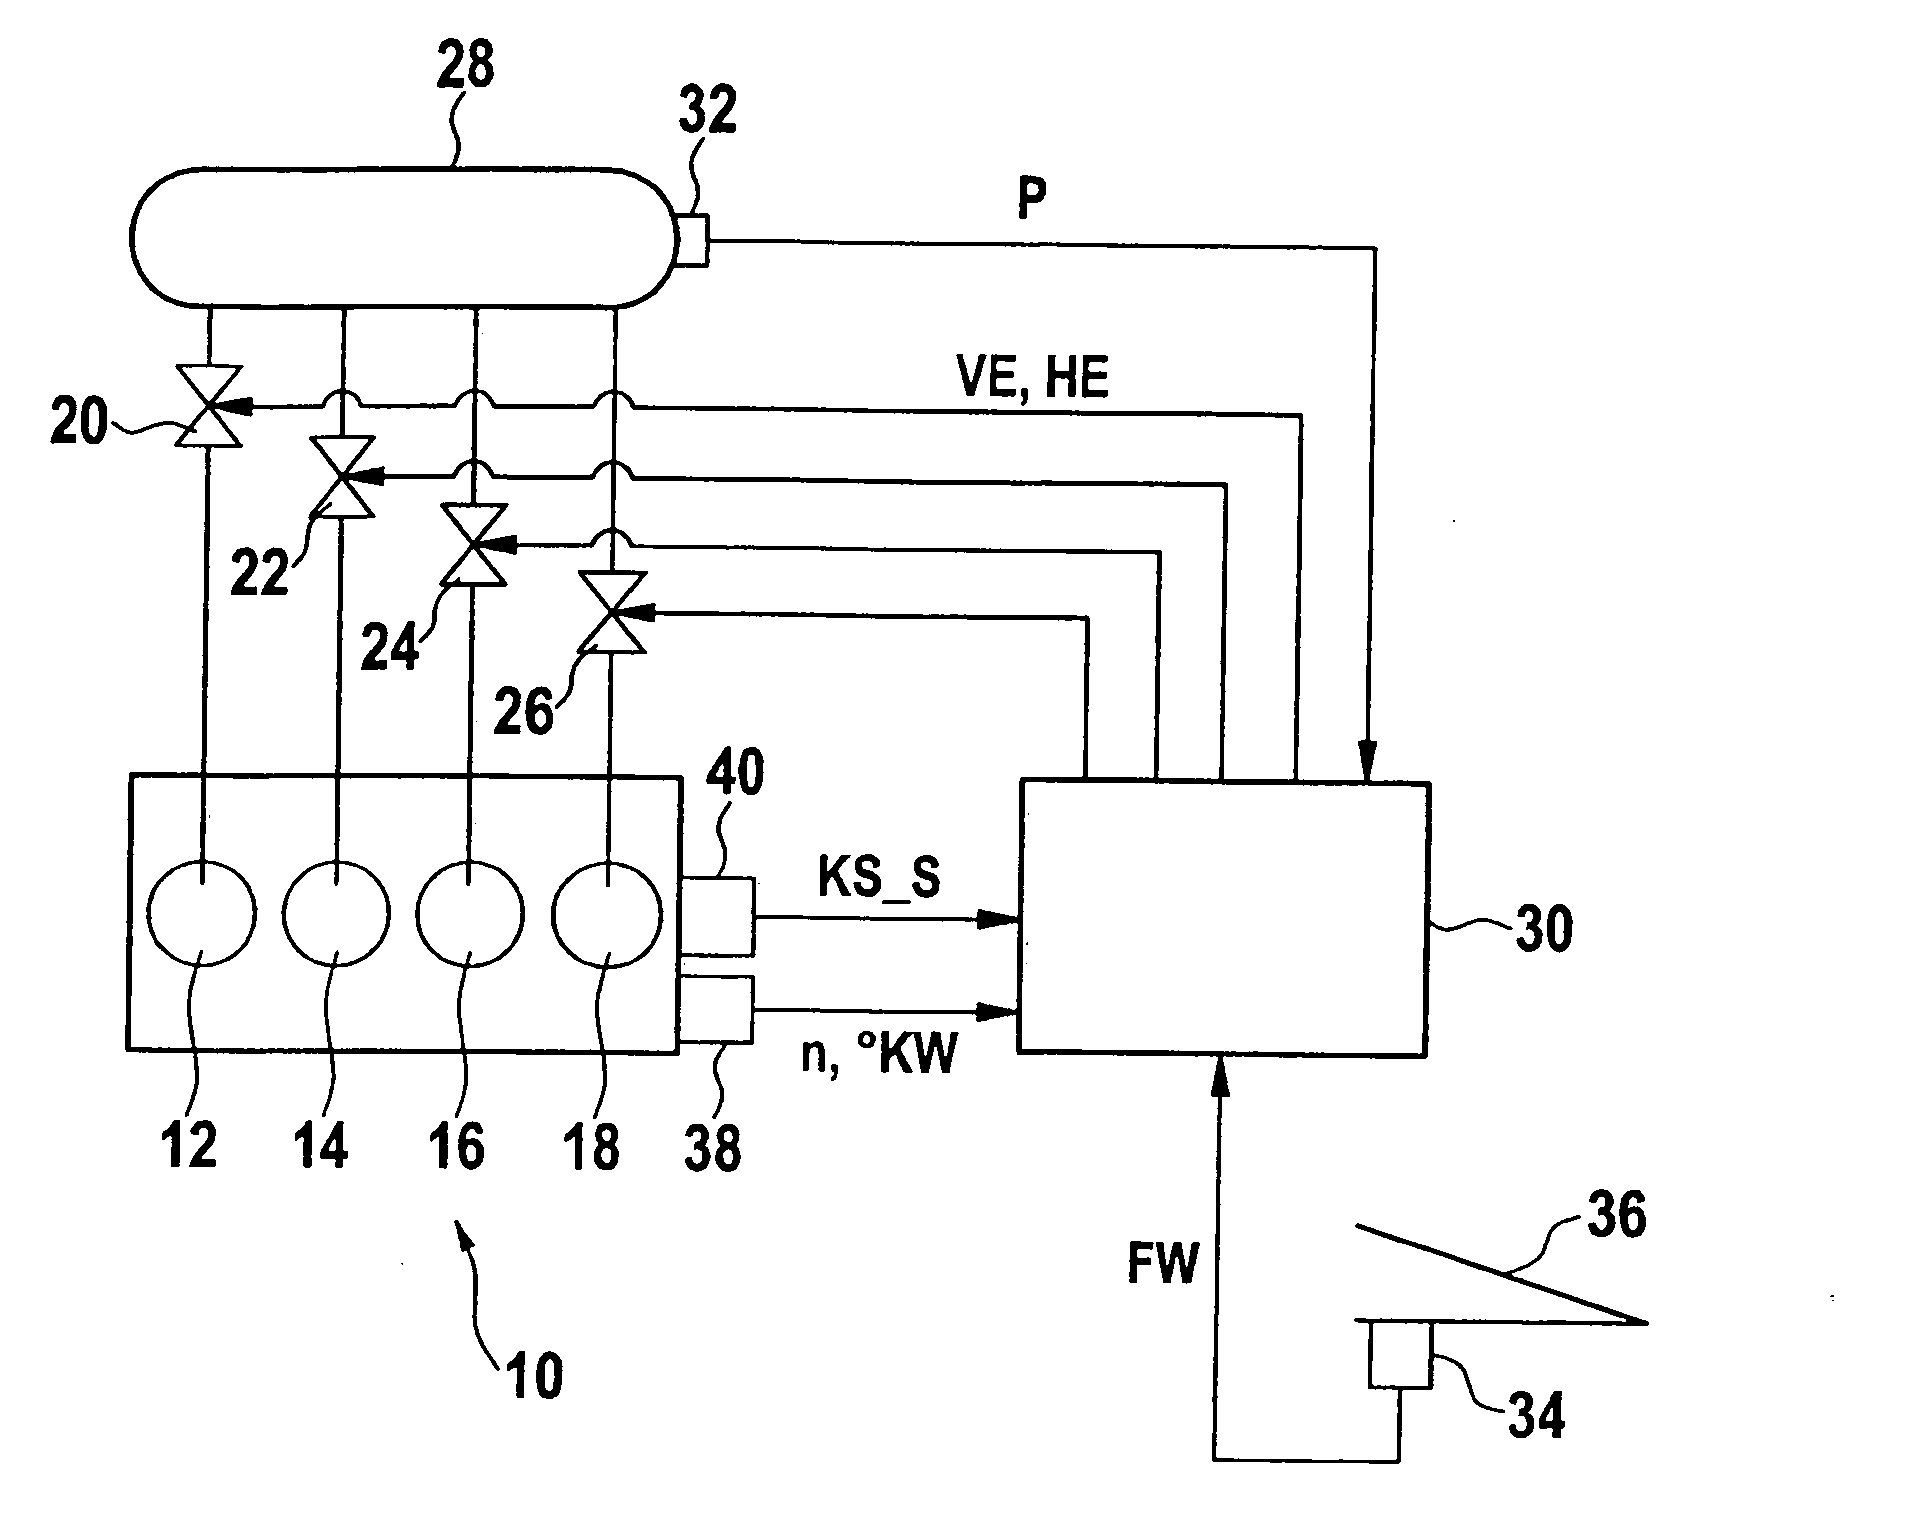 Method and Control Device for Metering Fuel To Combustion Chambers of an Internal Combustion Engine